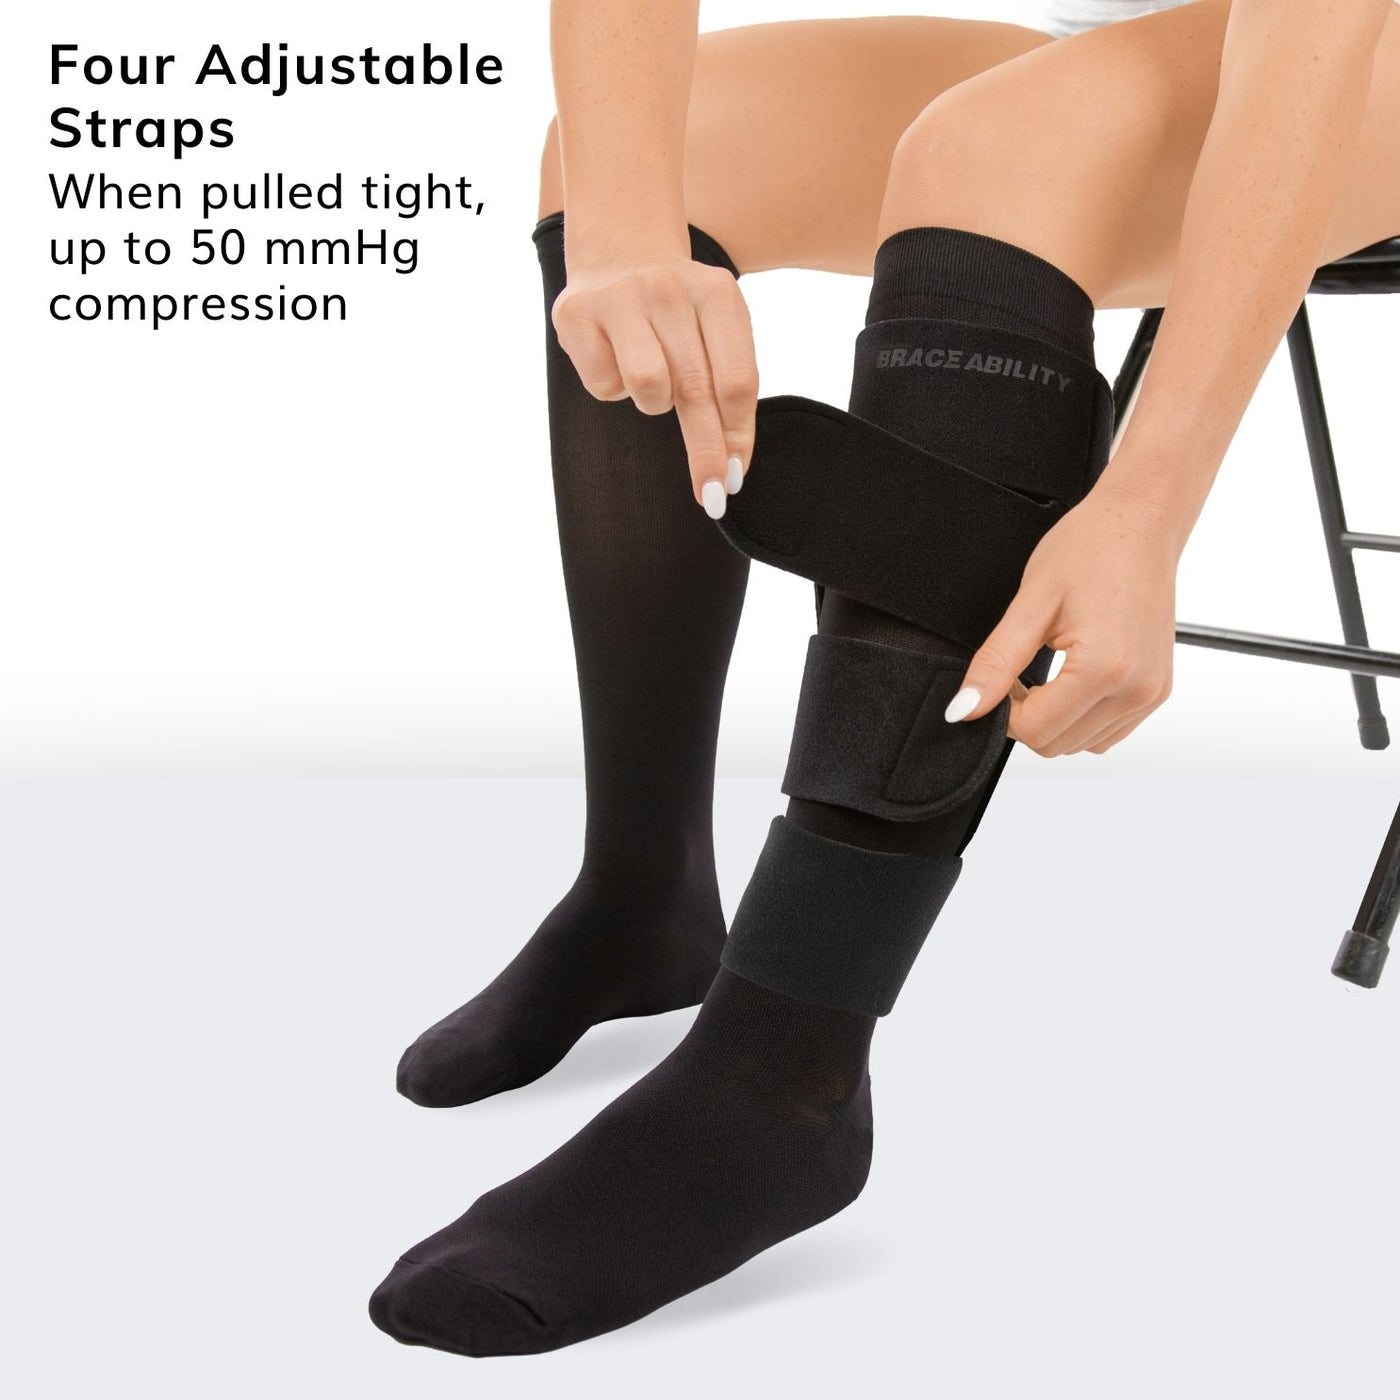 when pulled tight, the leg compression wrap can be as tight as 50 mmHg